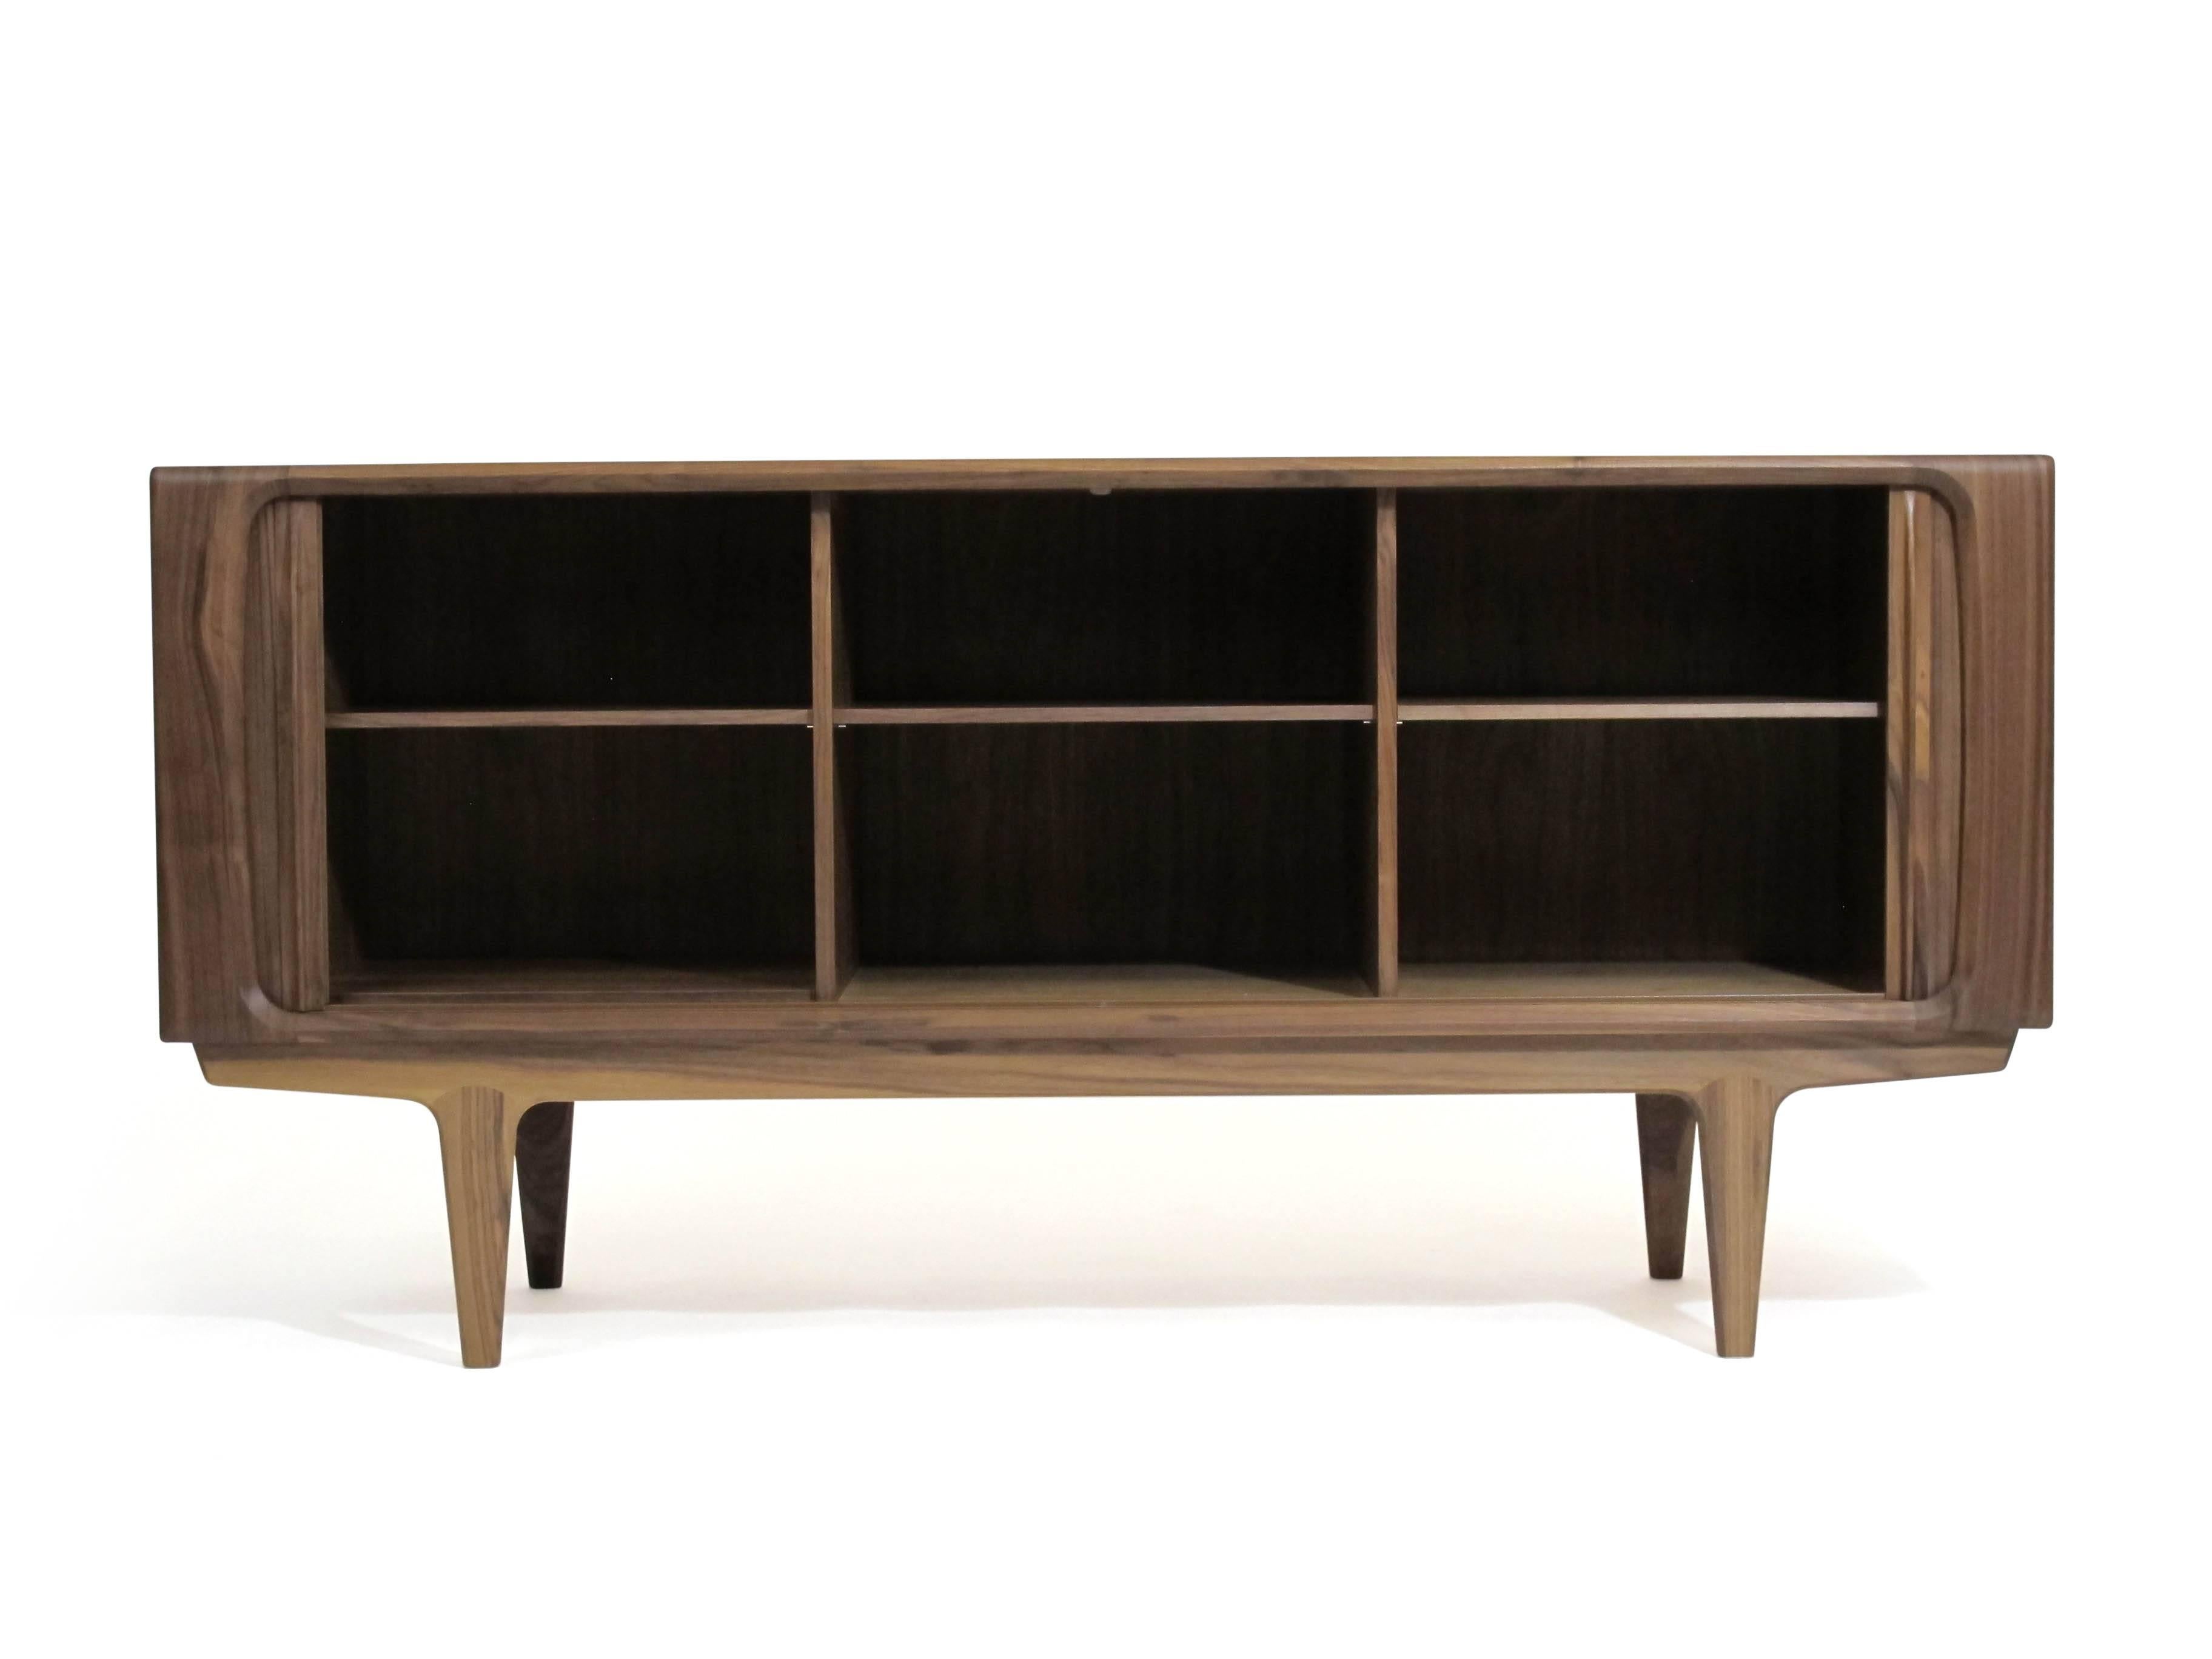 Model 142 sideboard in walnut by Bernhard Pedersen & Son, designed in 1965. Handcrafted of walnut and features tambour doors that roll seamlessly into the back. The interior of the cabinet is beautifully finished with adjustable shelves on each side